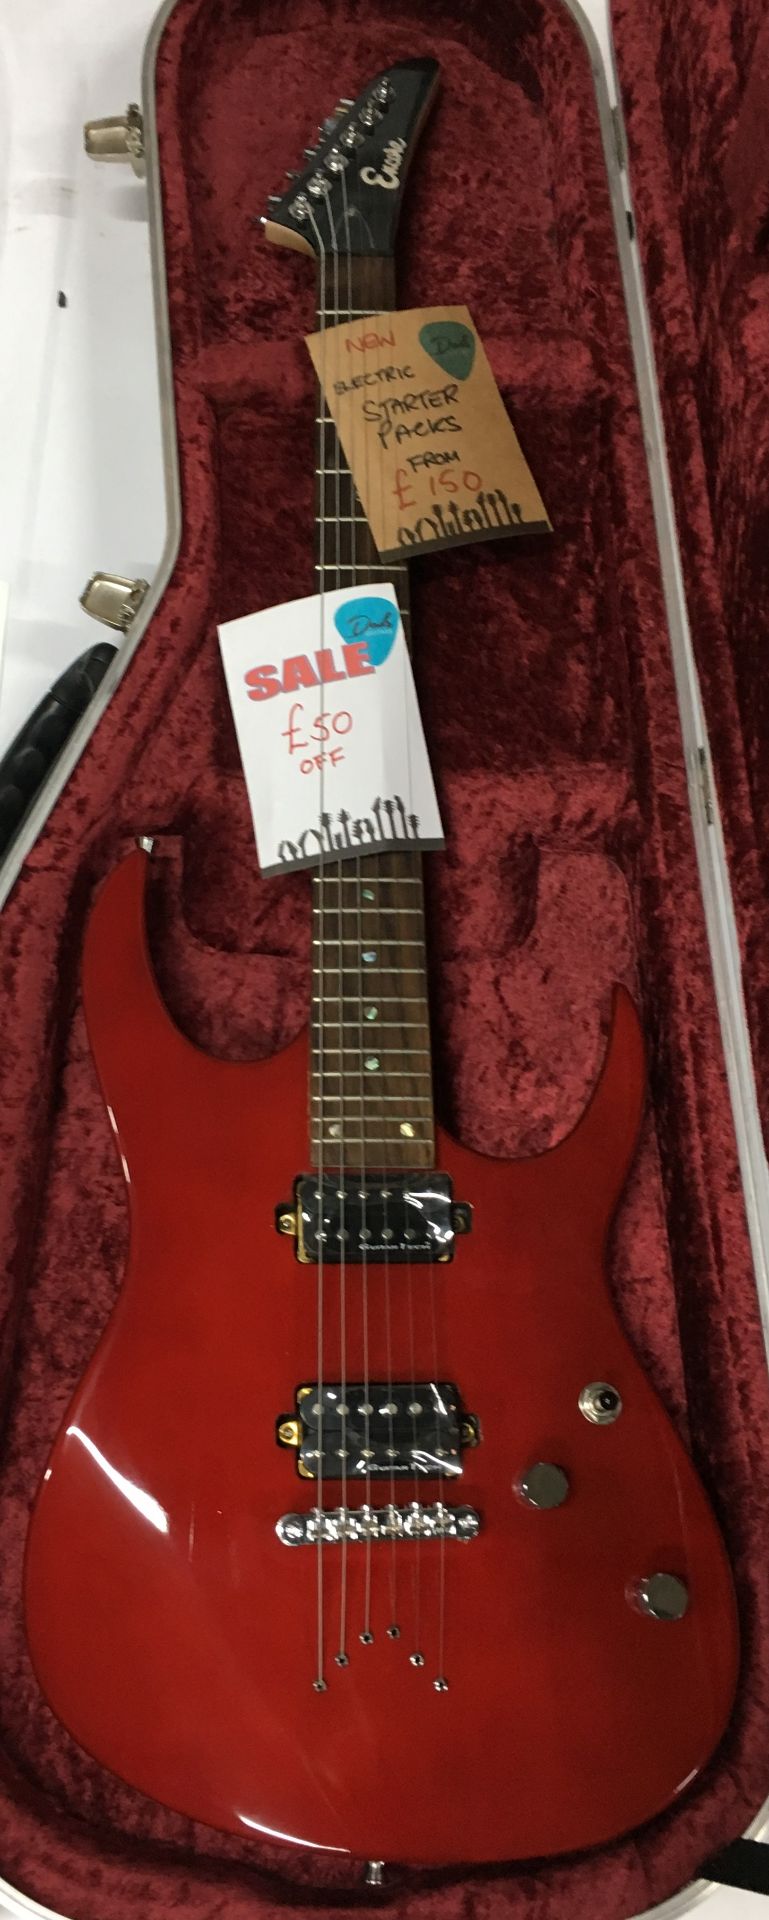 Encore Red Electric Guitar | In Case |New | RRP £150 - Image 2 of 3